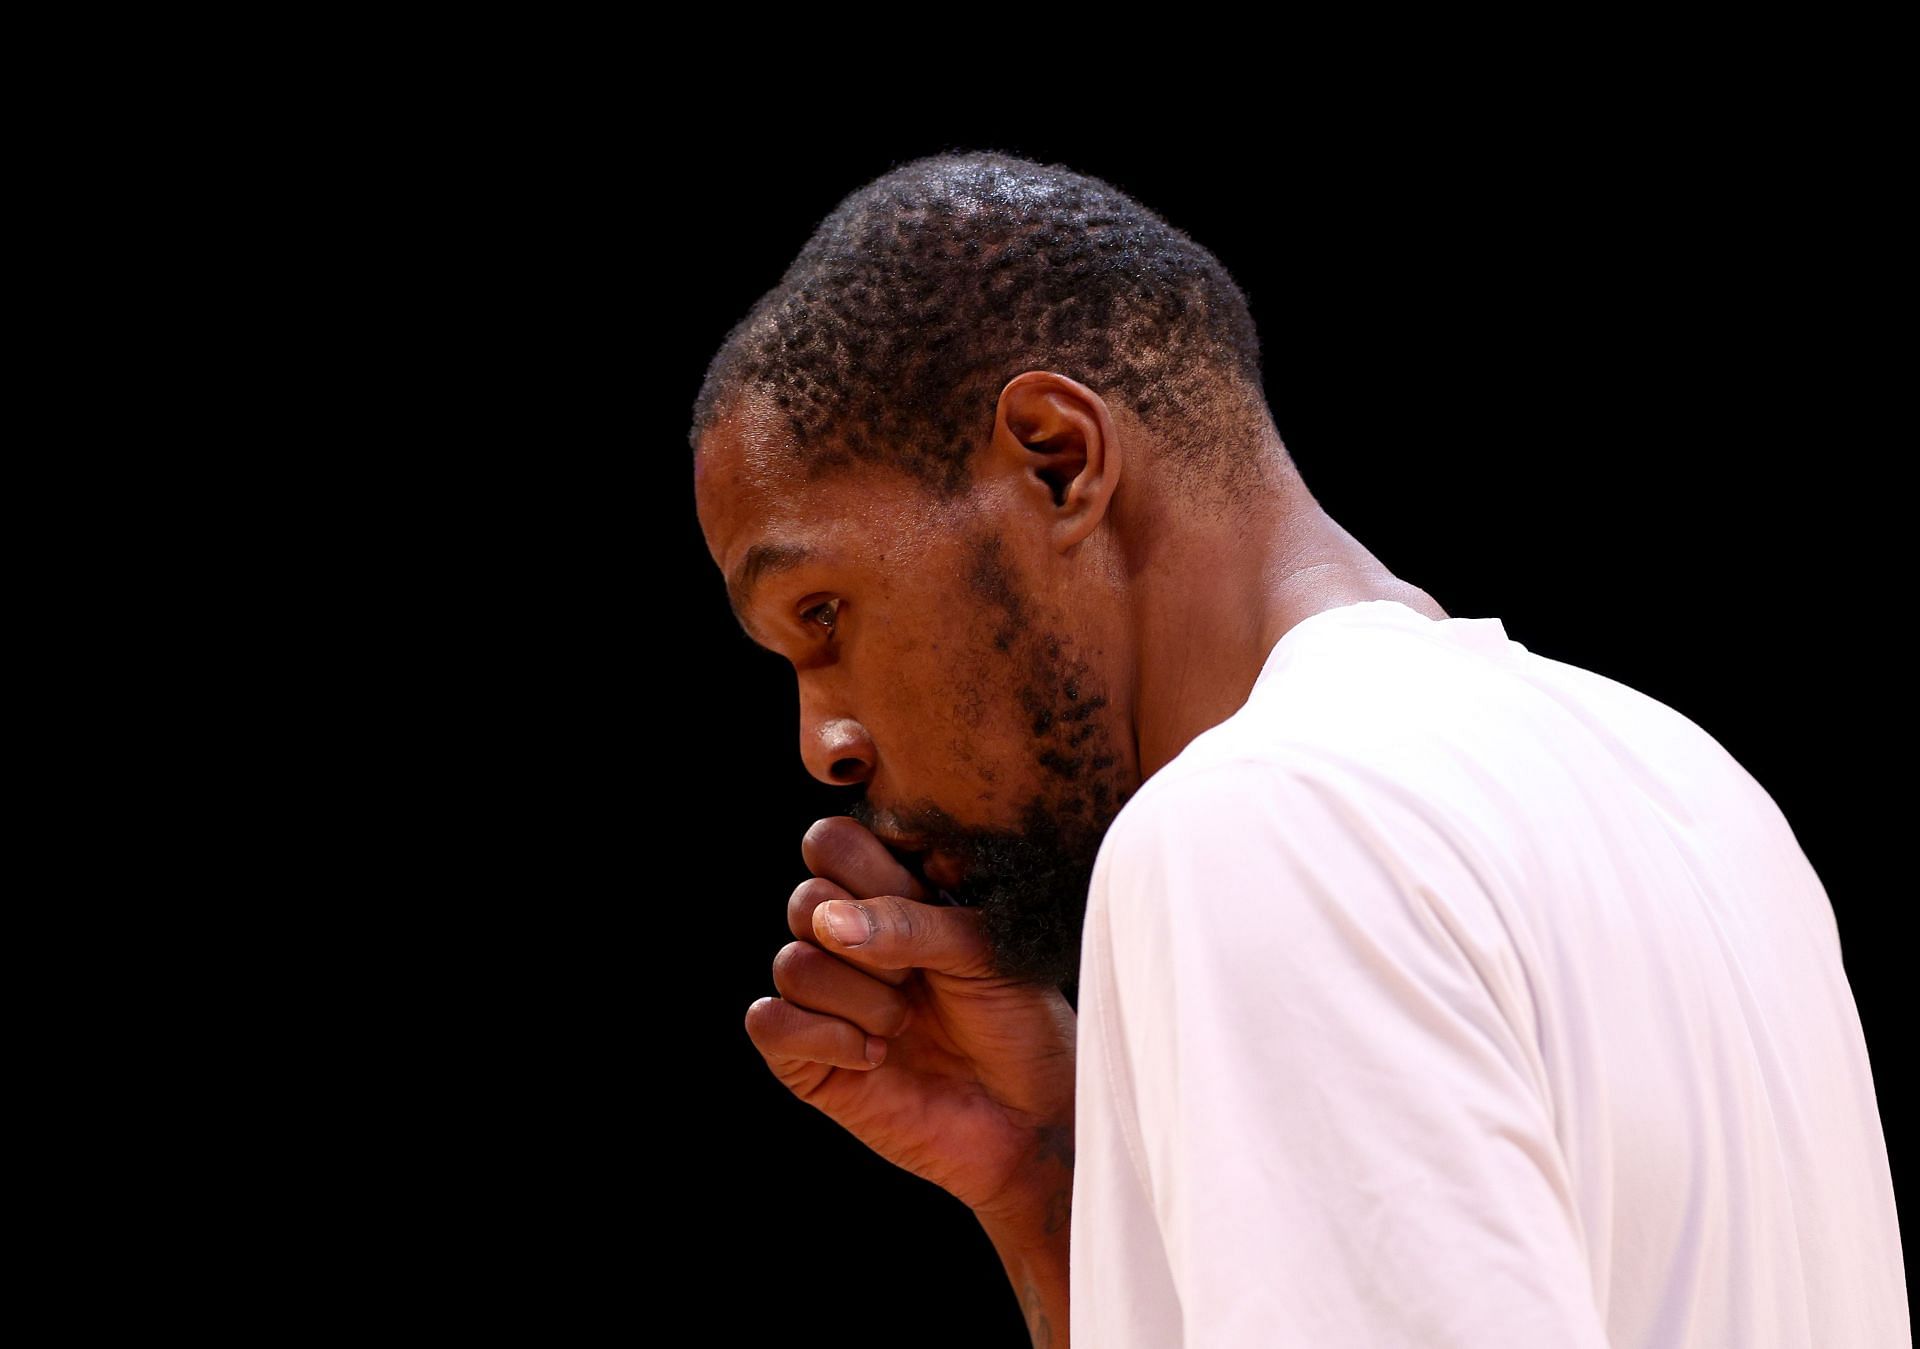 Kevin Durant warms up ahead of a playoff game